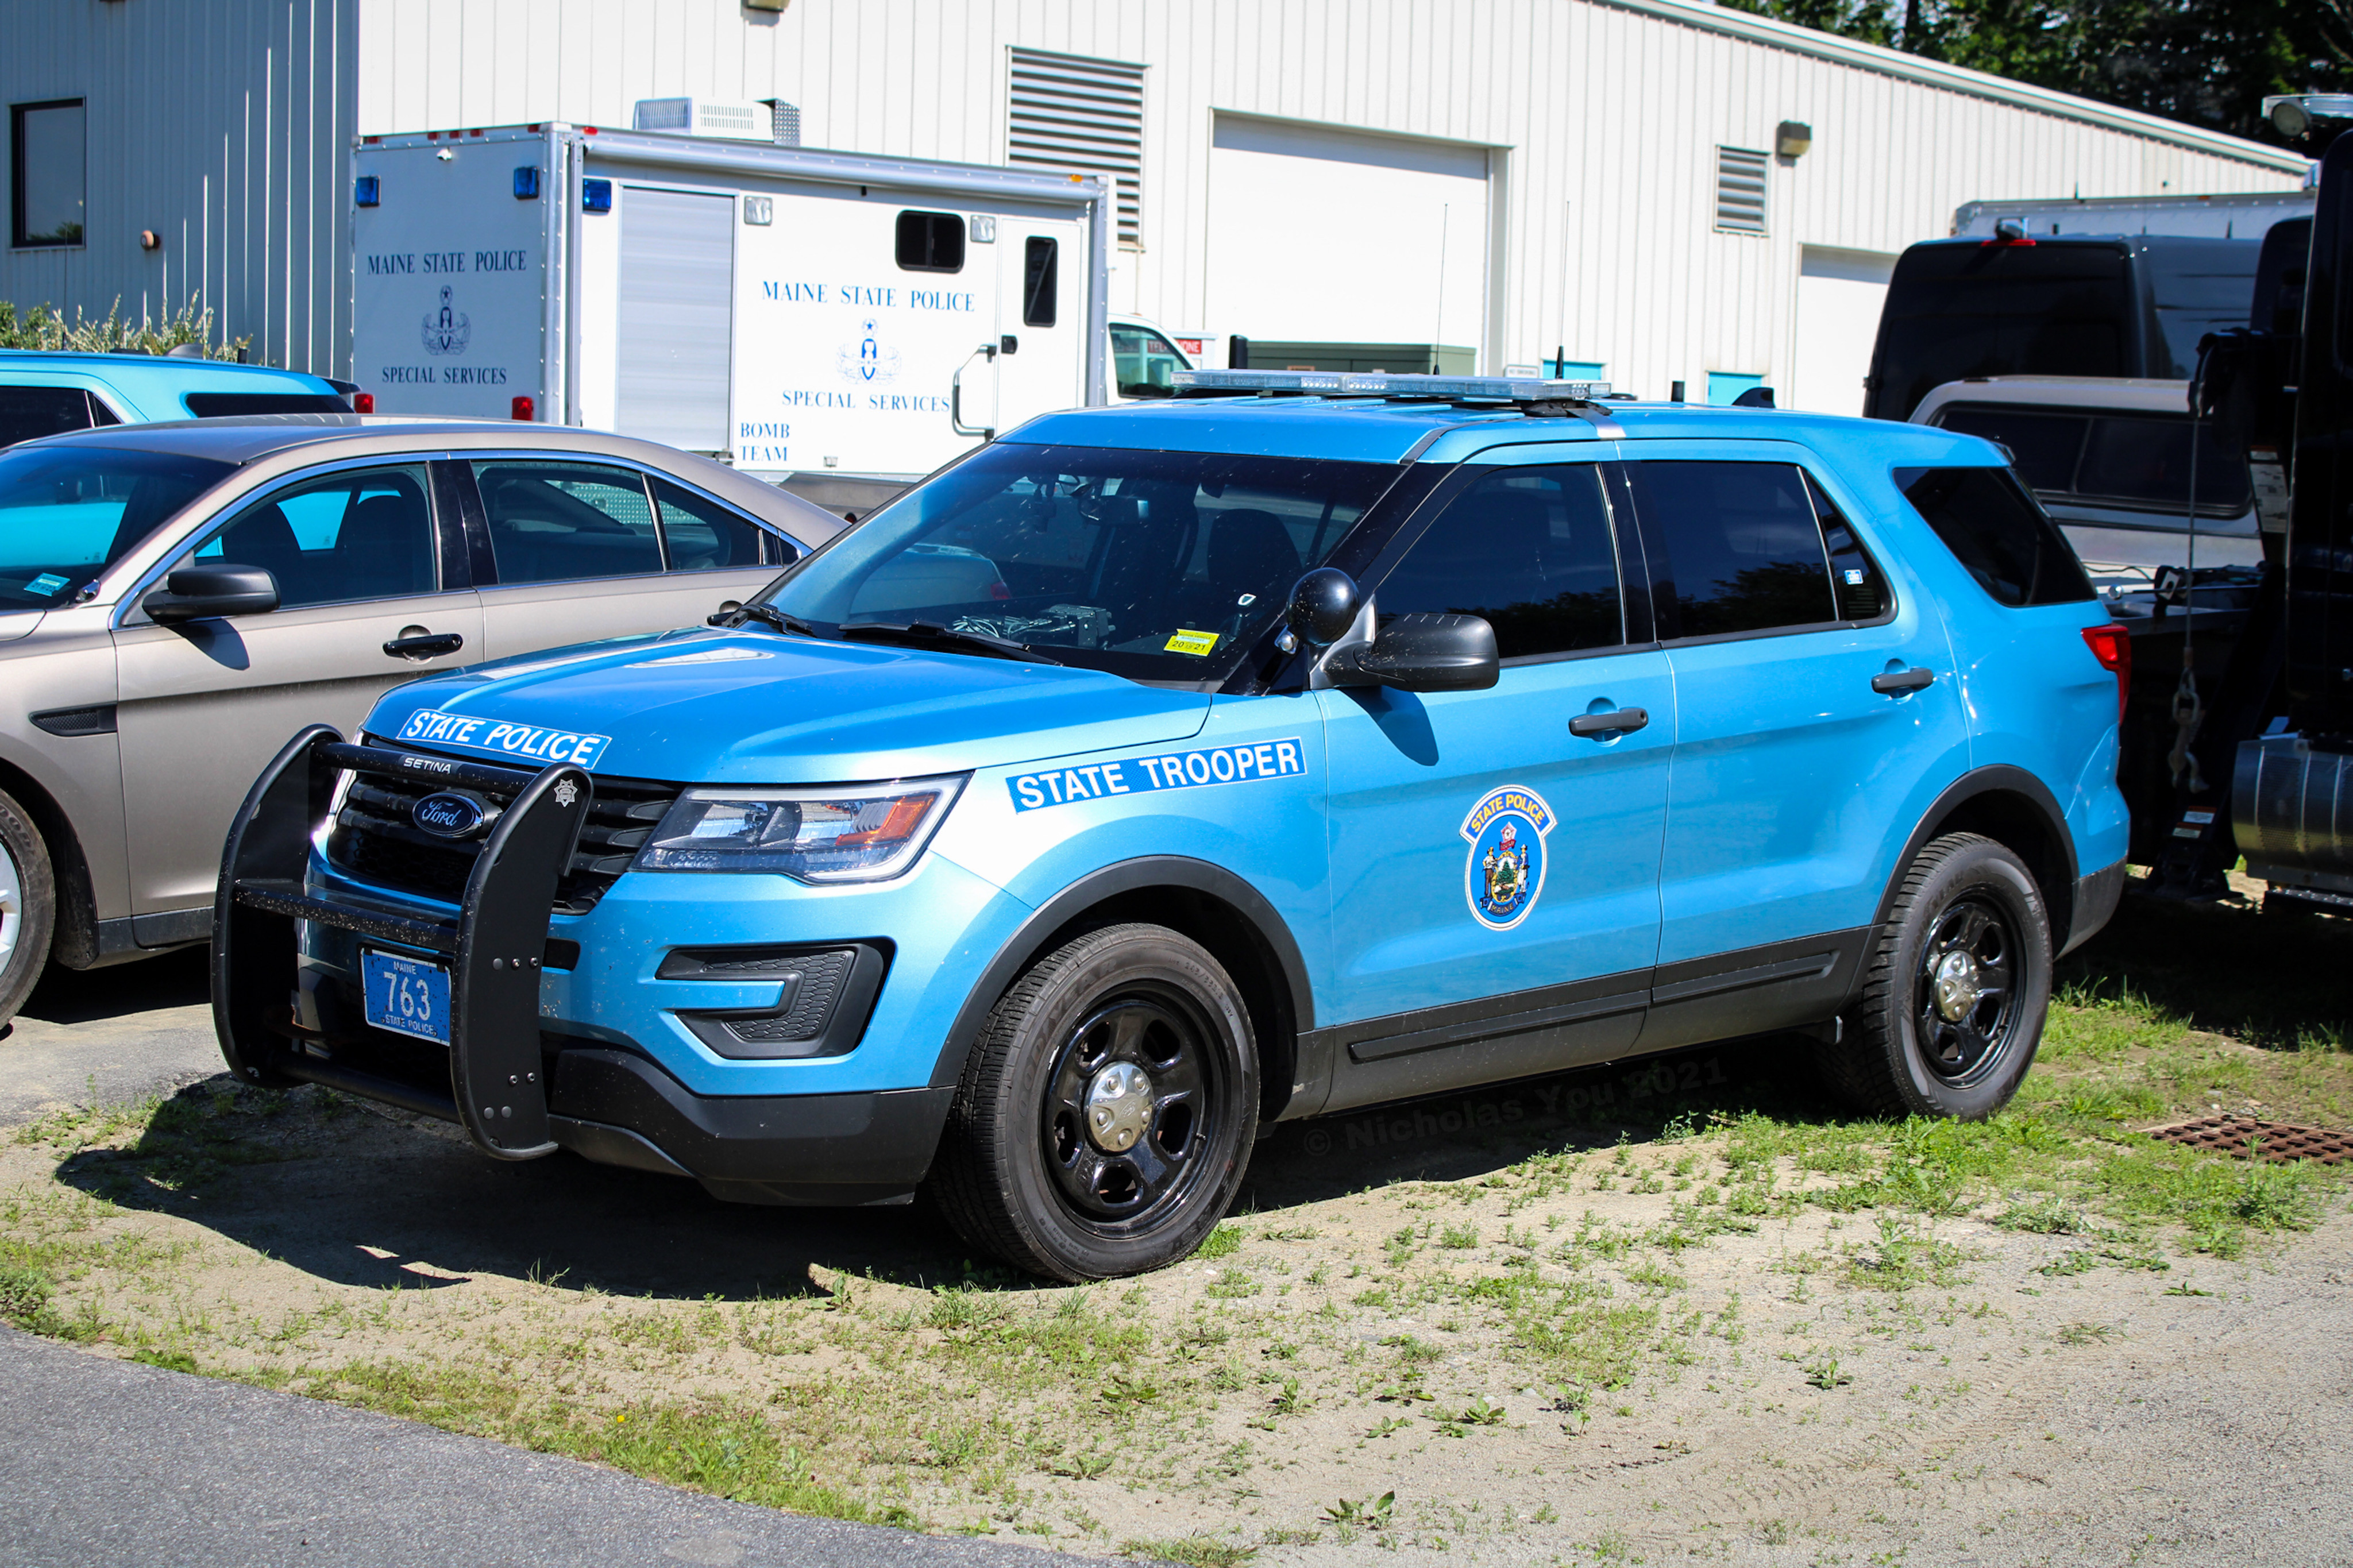 A photo  of Maine State Police
            Cruiser 763, a 2016-2019 Ford Police Interceptor Utility             taken by Nicholas You